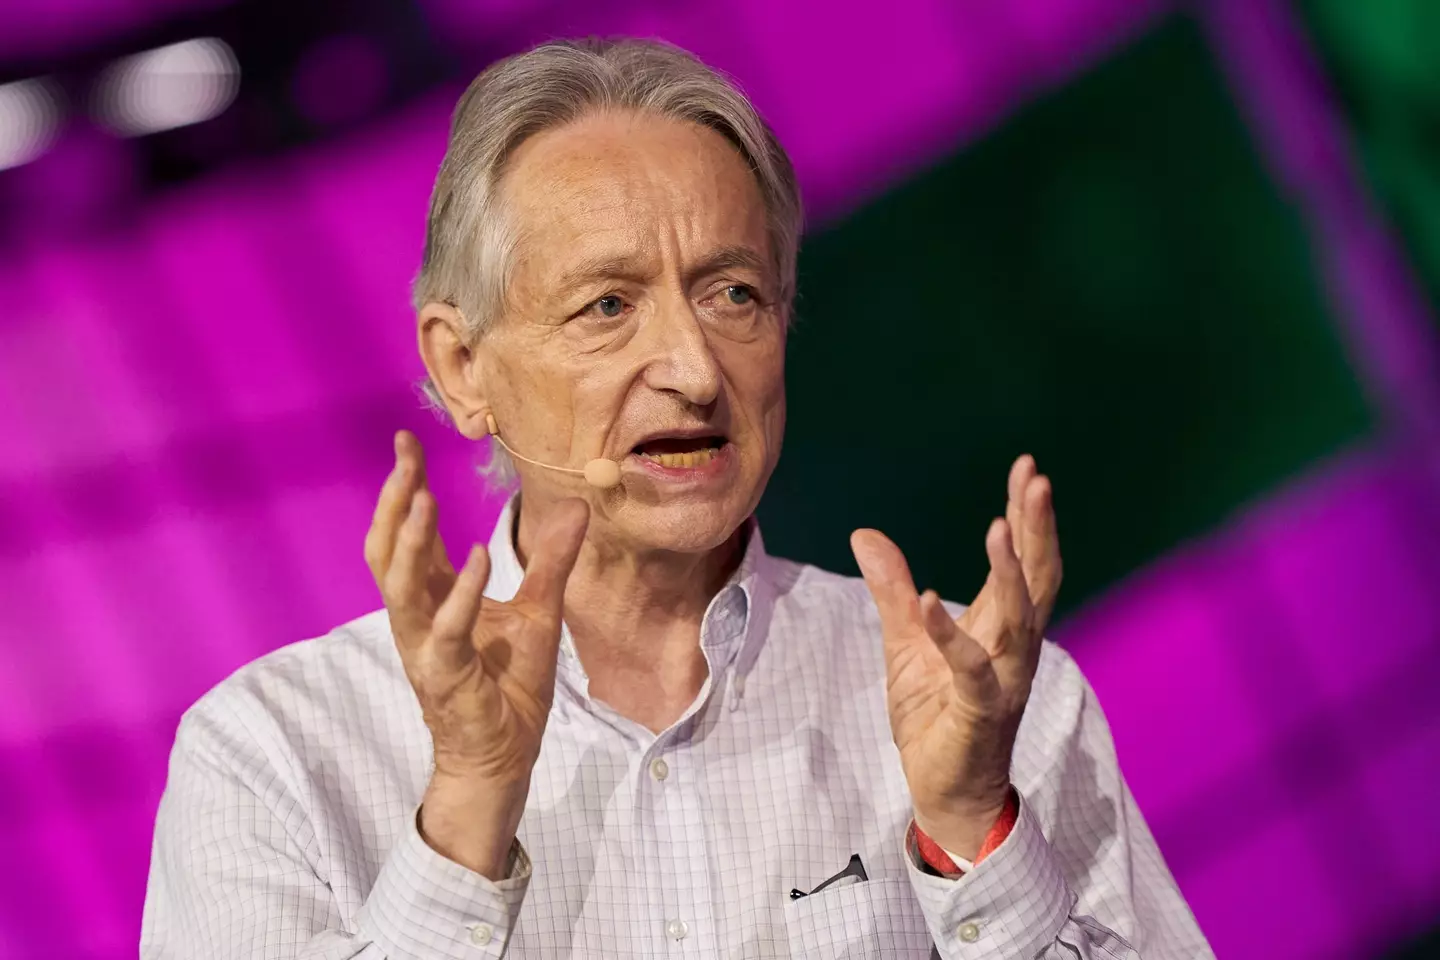 Dr Geoffrey Hinton has actively spoken out about his fears surrounding the rise in use of AI.